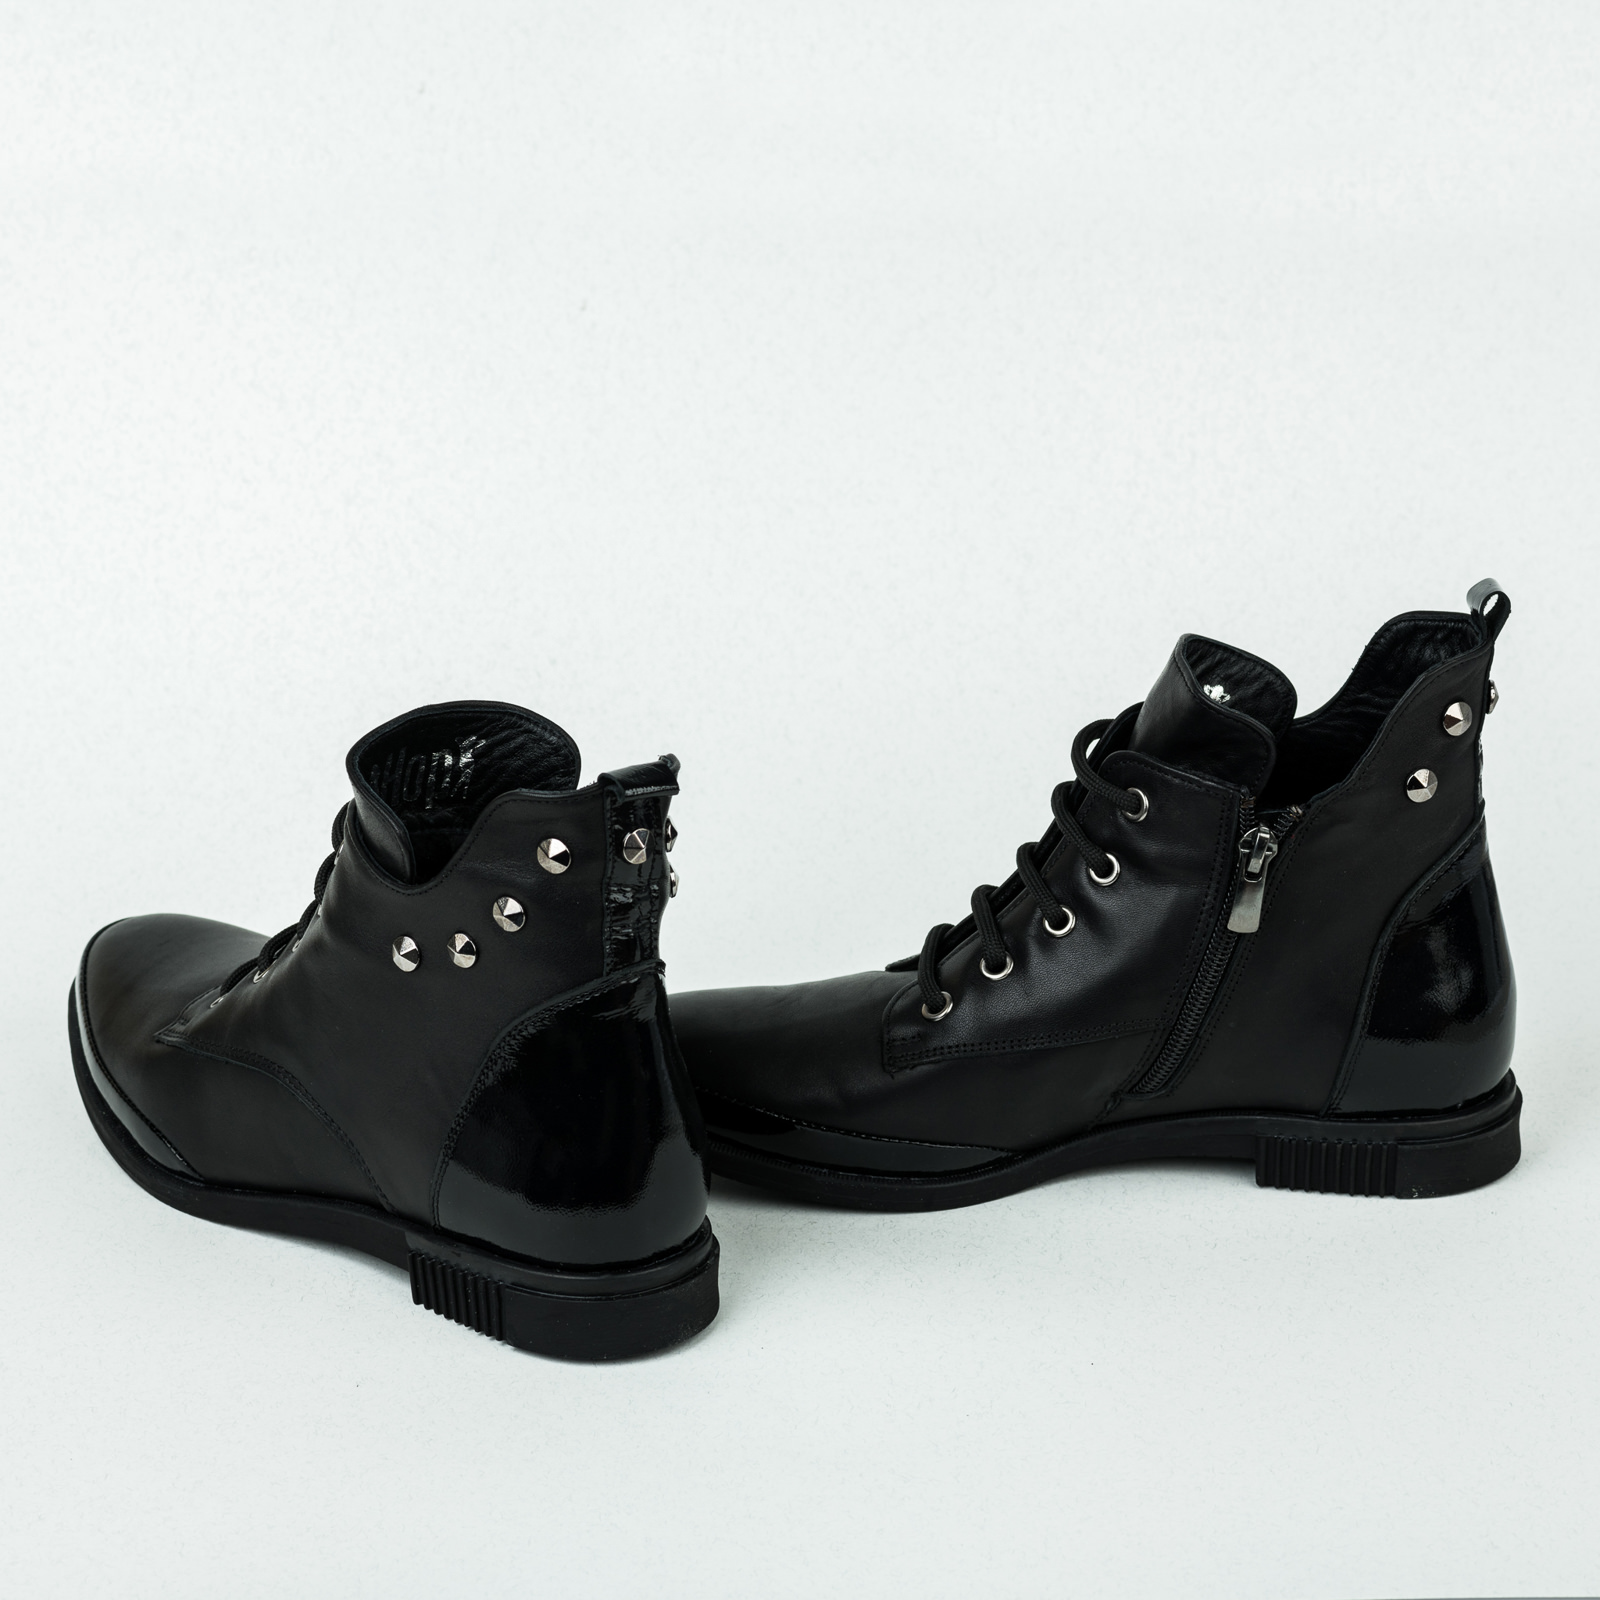 Leather ankle boots B017 - BLACK